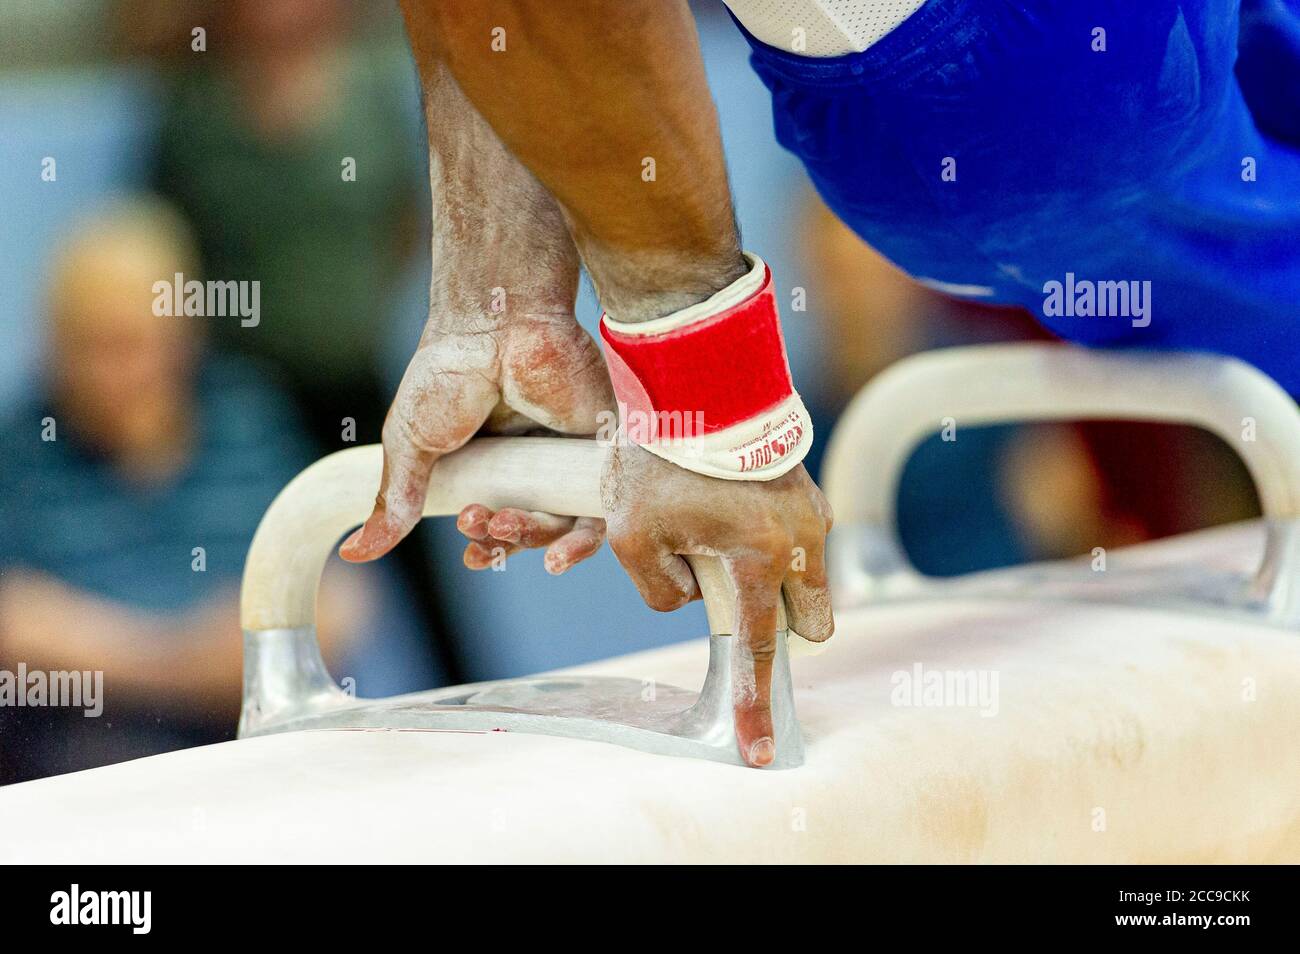 Gymnast of the French national team on a pommel horse, one of the men's artistic gymnastics apparatus. Chalk to keep hands dry Stock Photo